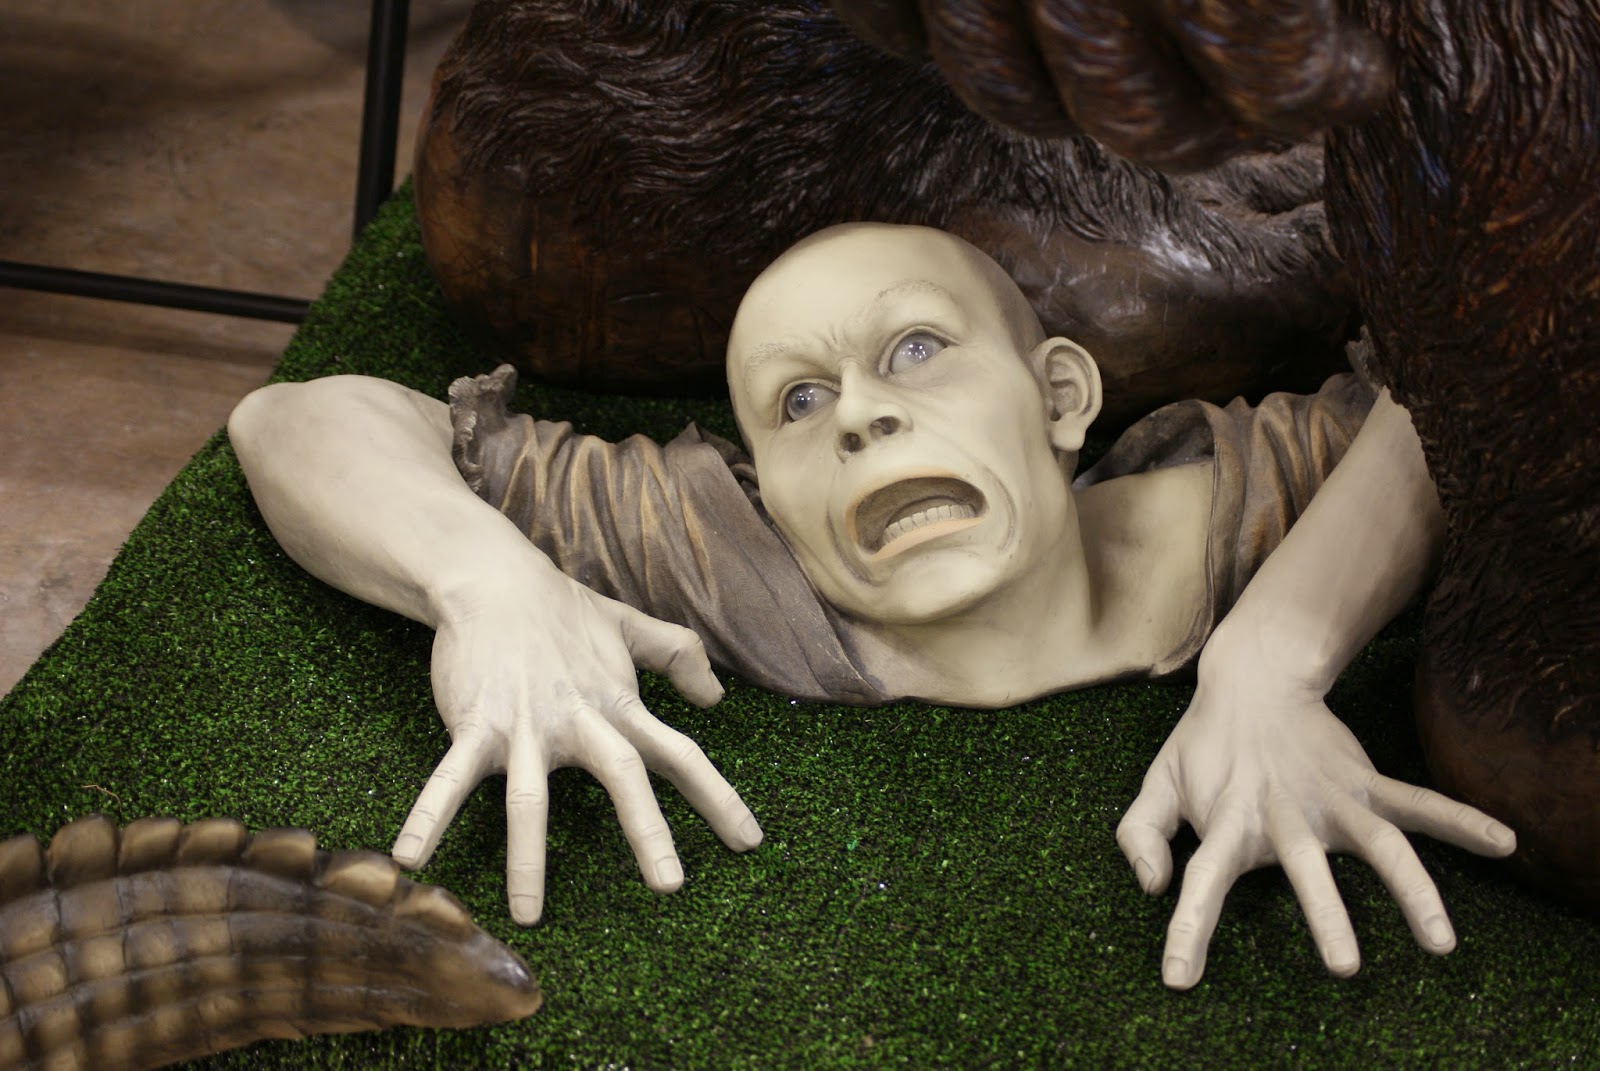 Zombie Lawn Ornament for your lawn